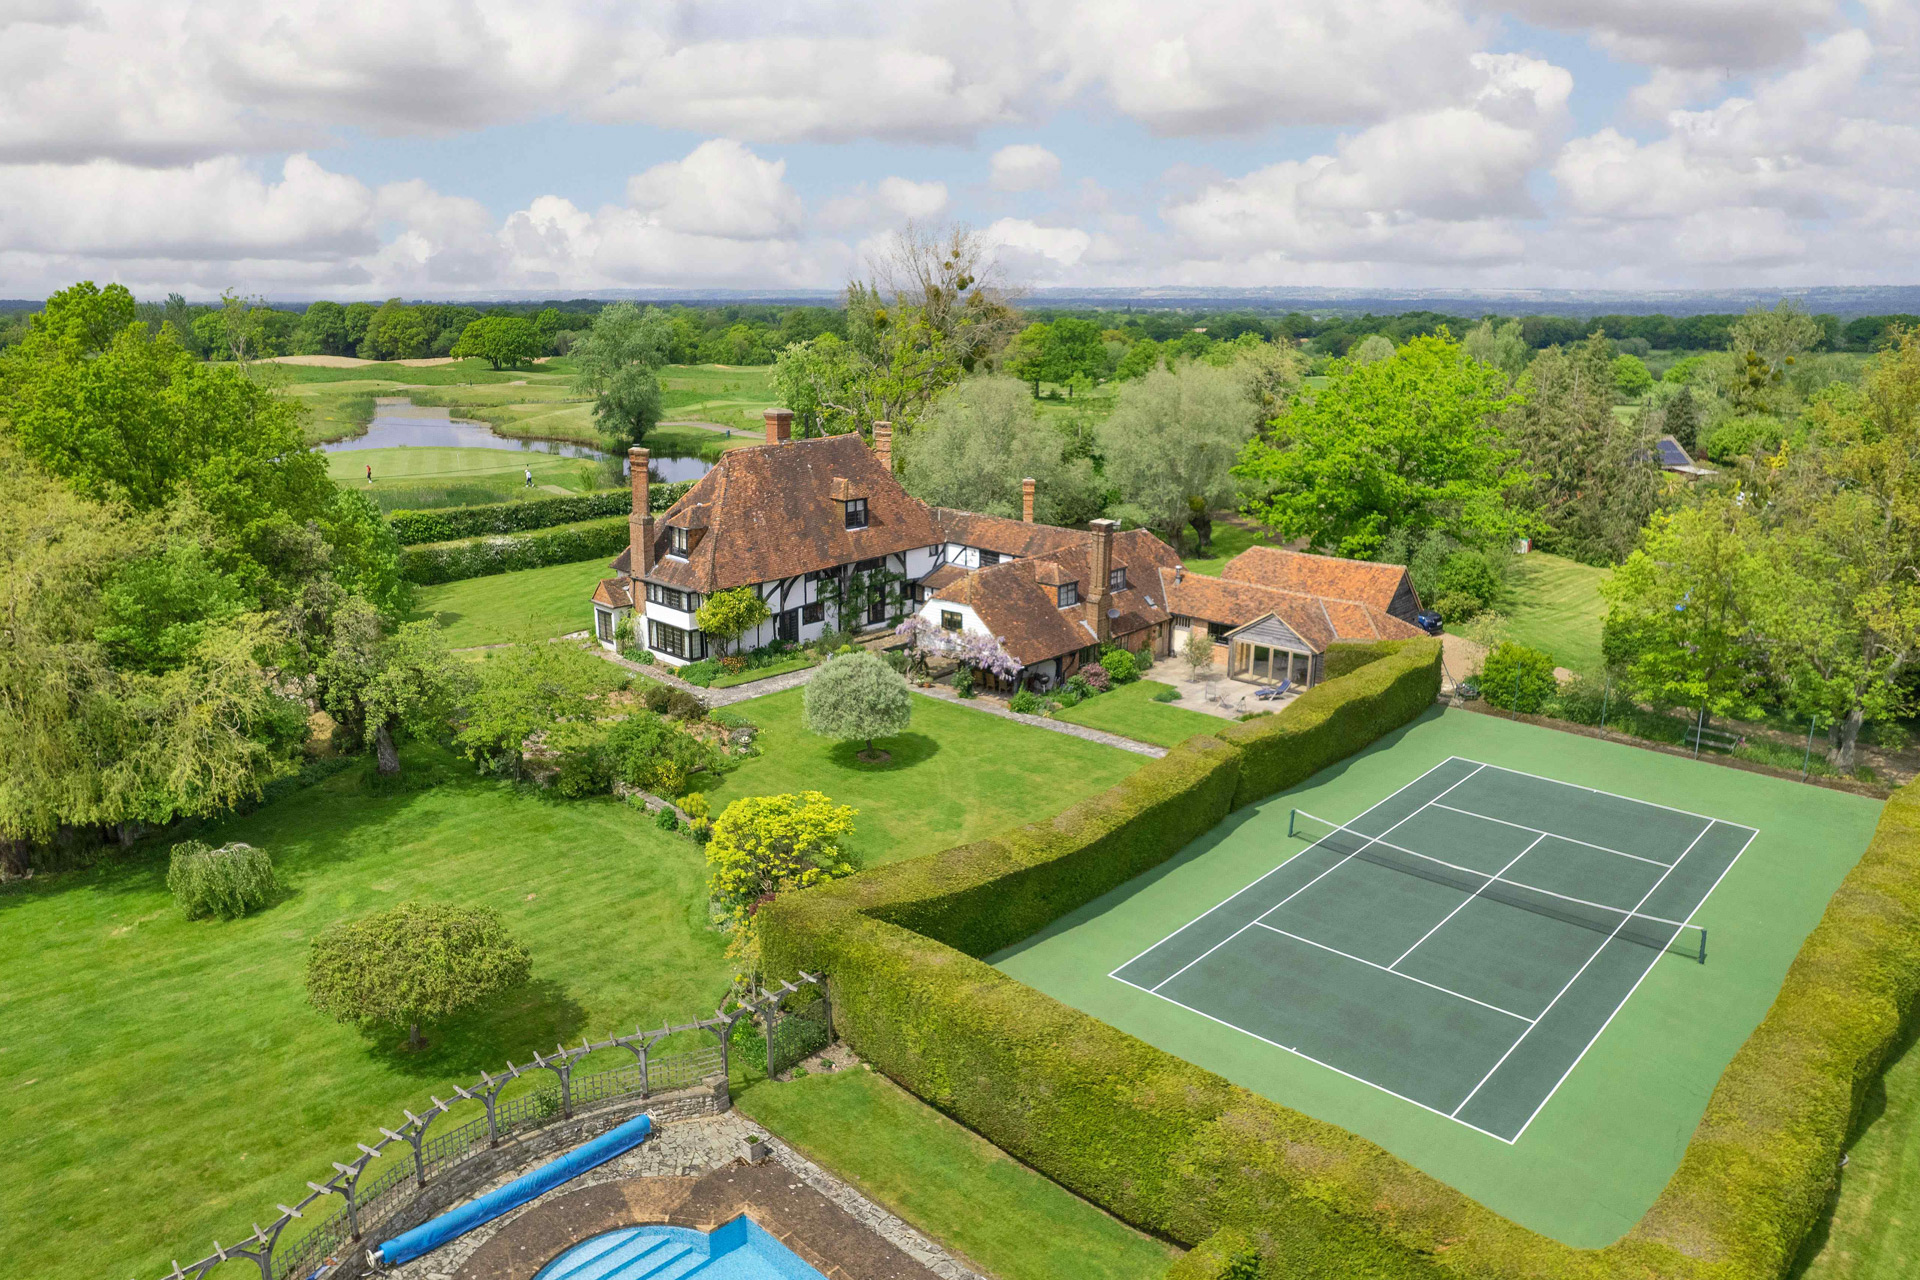 Aerial view of country estate with tennis court and pool